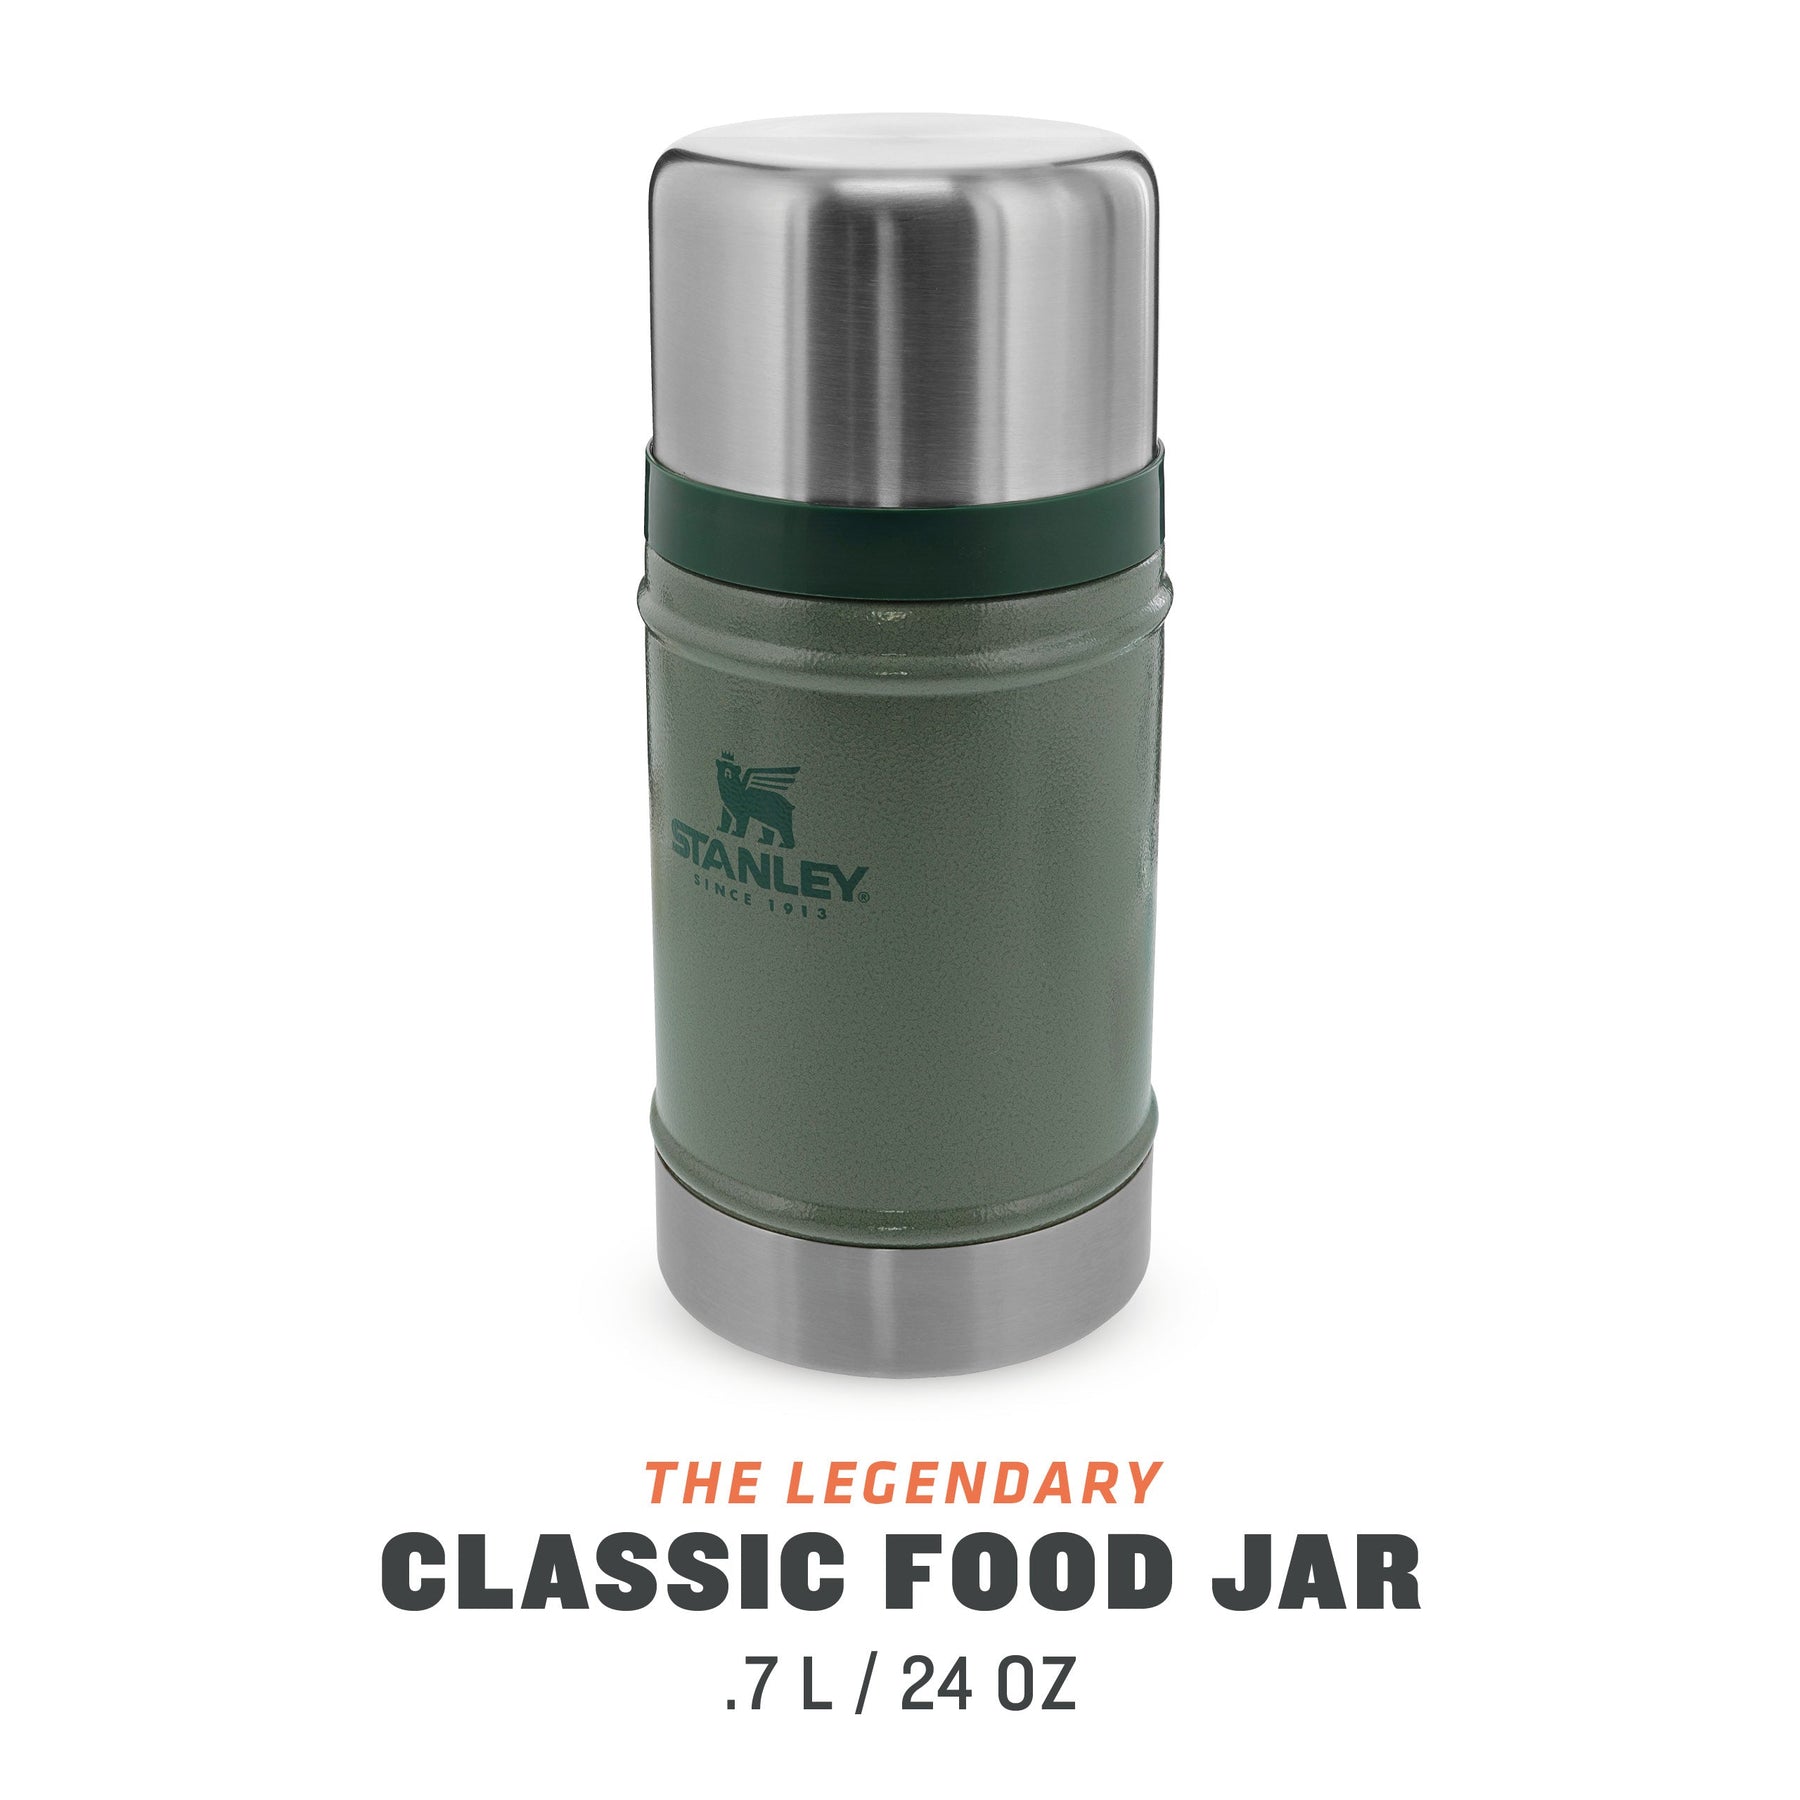 Legendary Classic Thermos 0,7 l for dinner - Stanley 10-07936-003